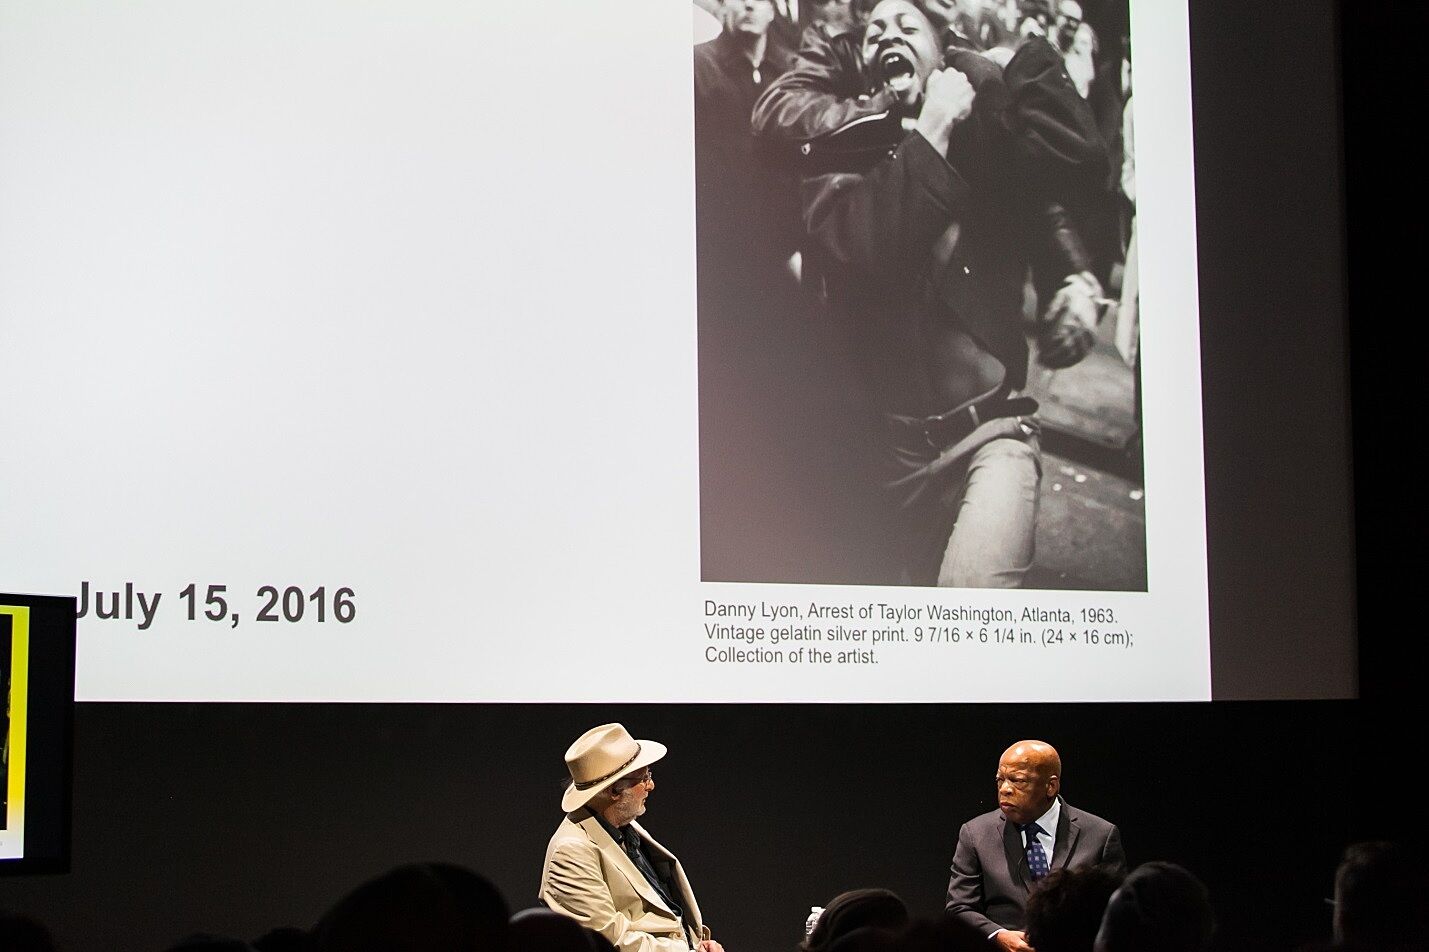 The two panelists on stage with a Civil Rights photograph displayed above.